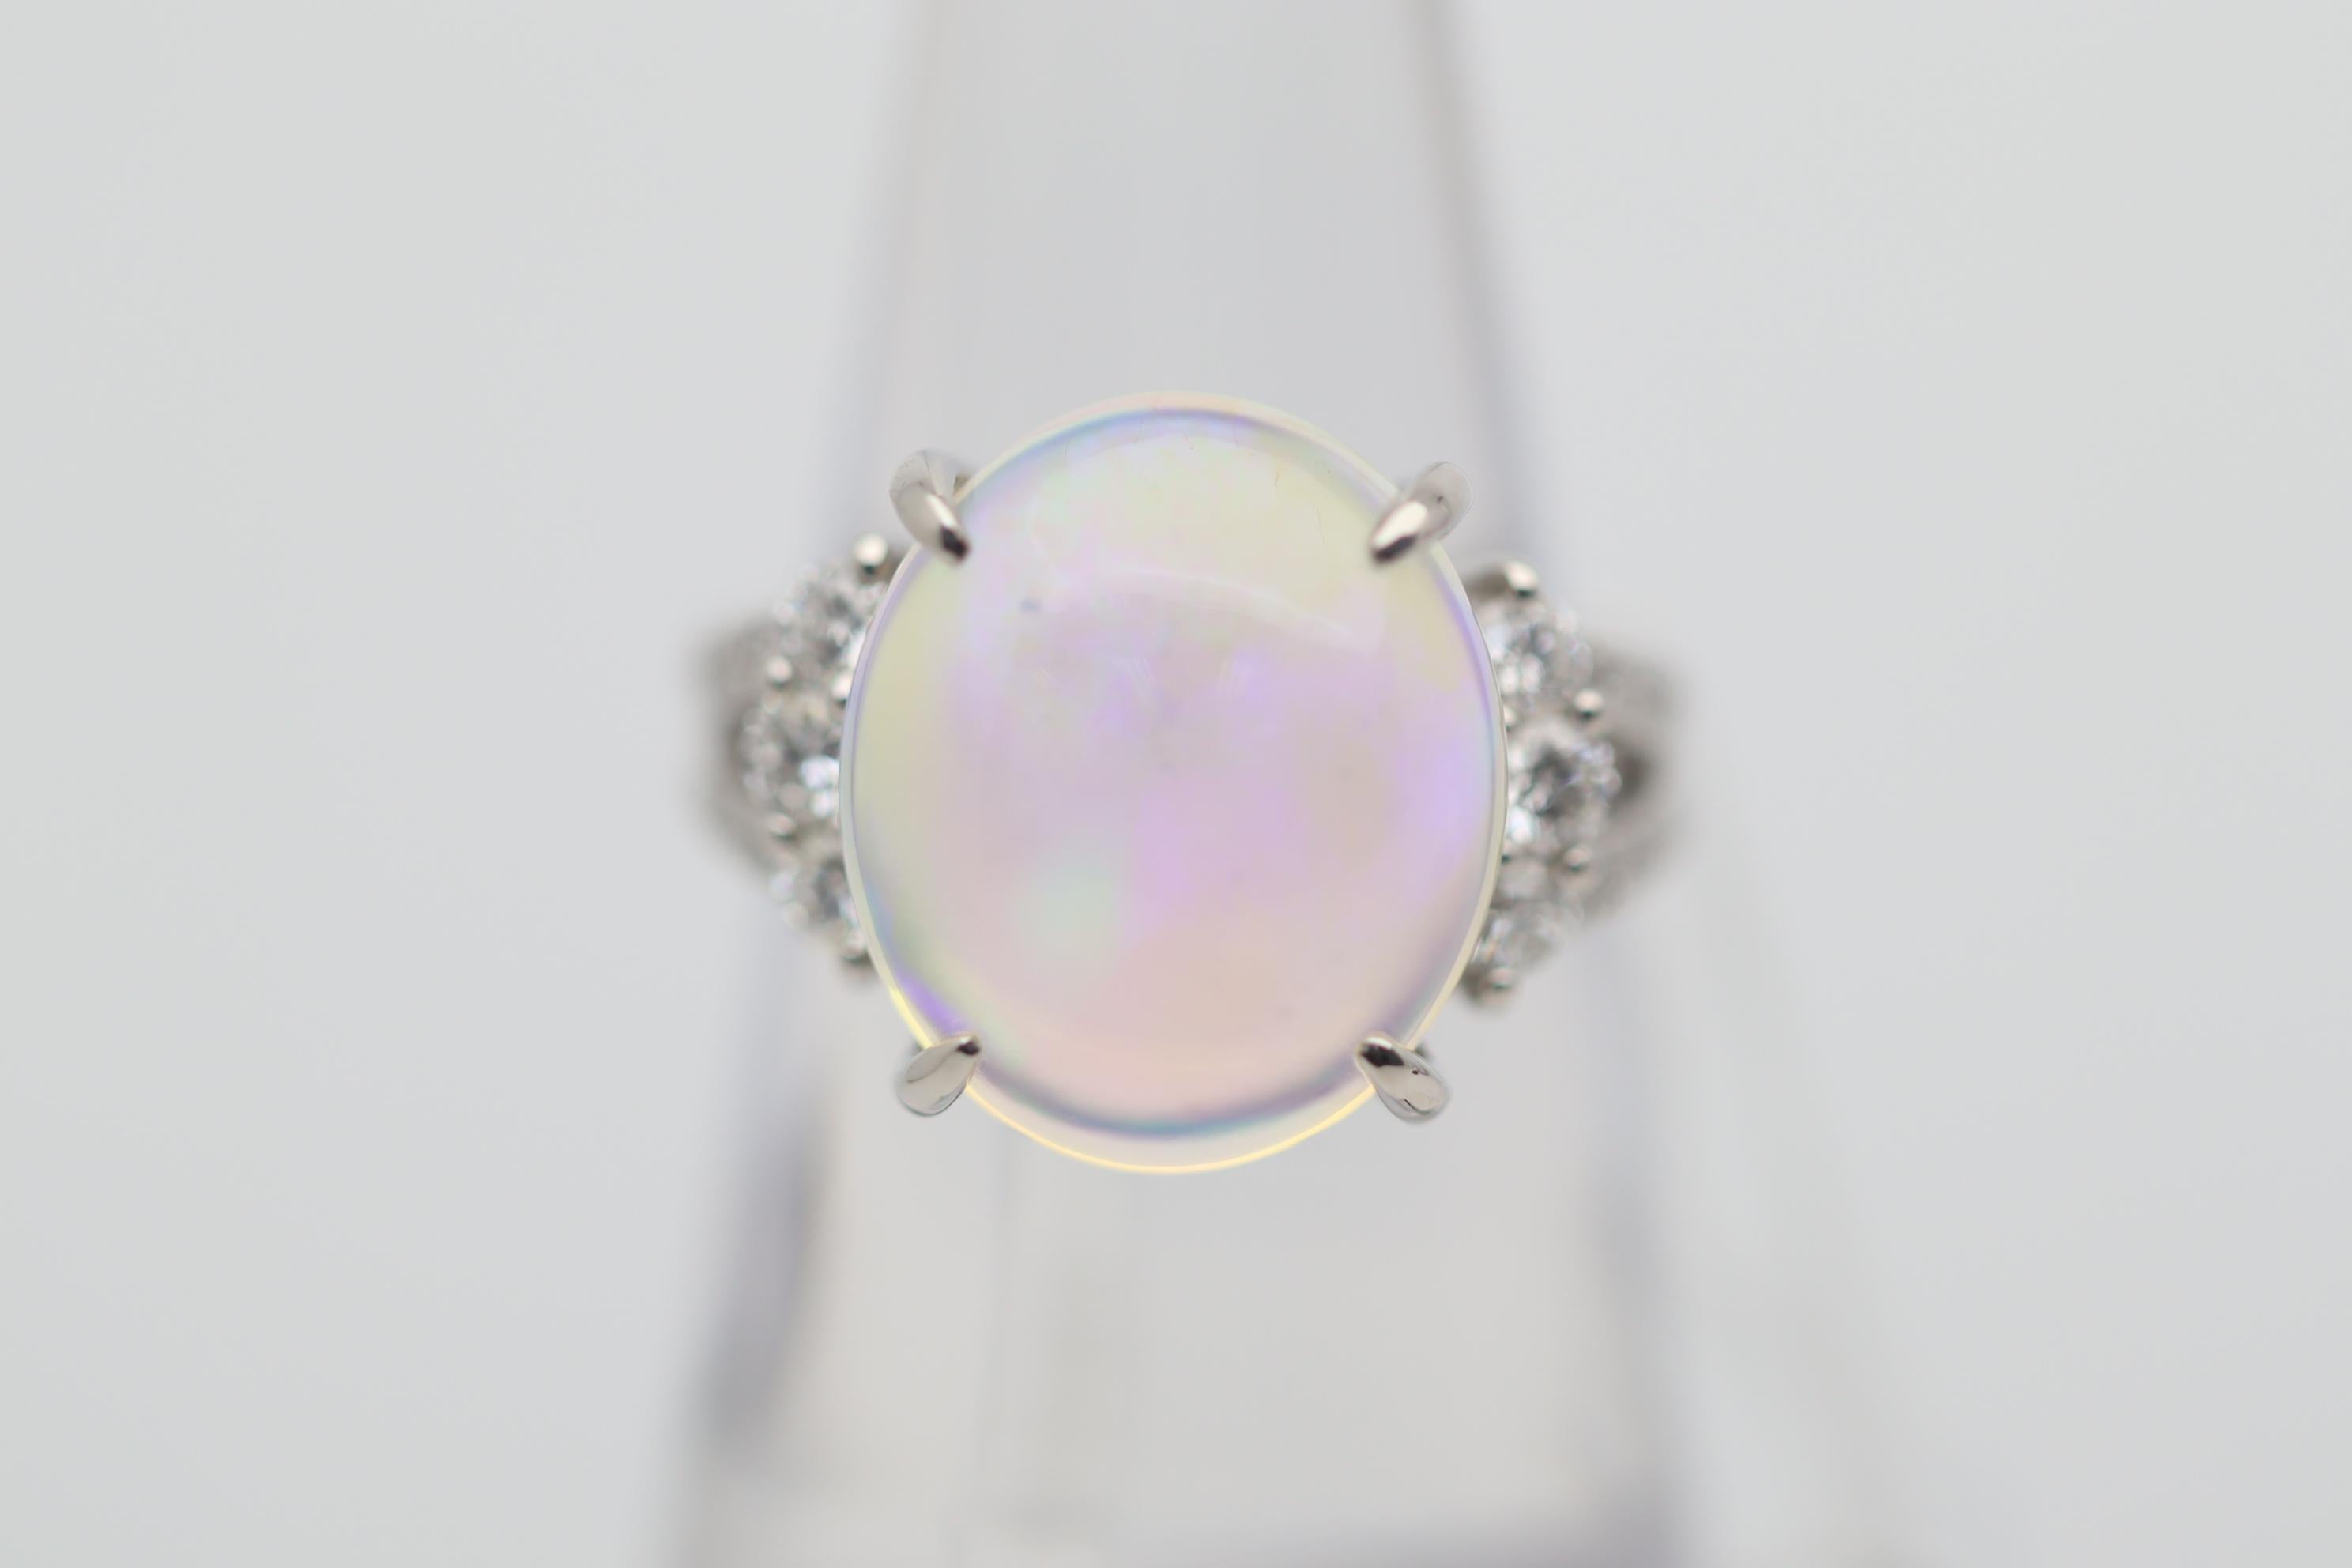 A lovely platinum made ring featuring a fine Australian crystal opal weighing an impressive 7.67 carats. It has strong play-of-color as bright intense flashes of blue, green, purple and some reds dance across the crystal clean opal. It is accented